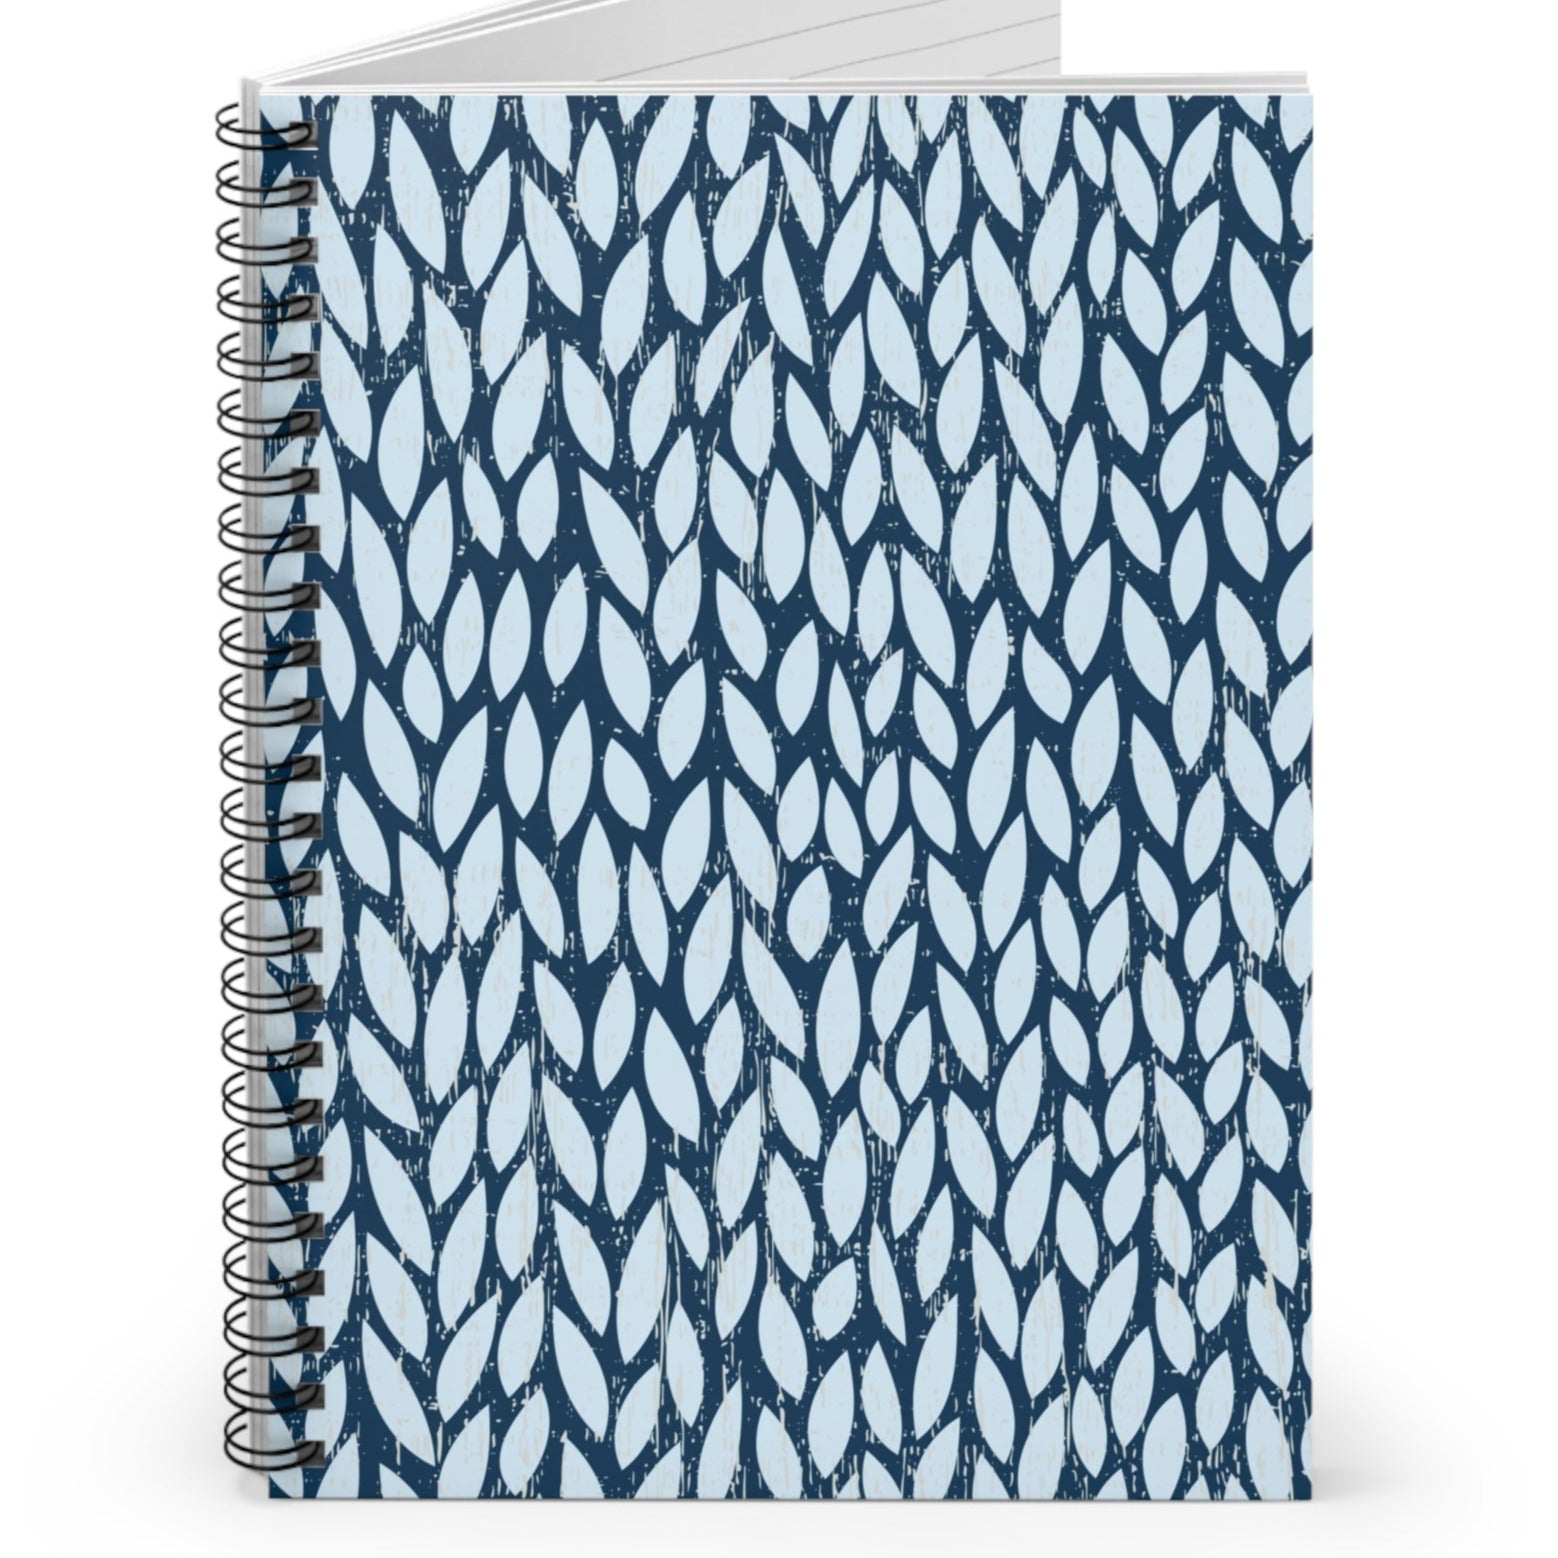 Blue and White Yarn Pattern Spiral Notebook - Ruled Line: Cozy Crafting Design - Eddy and Rita